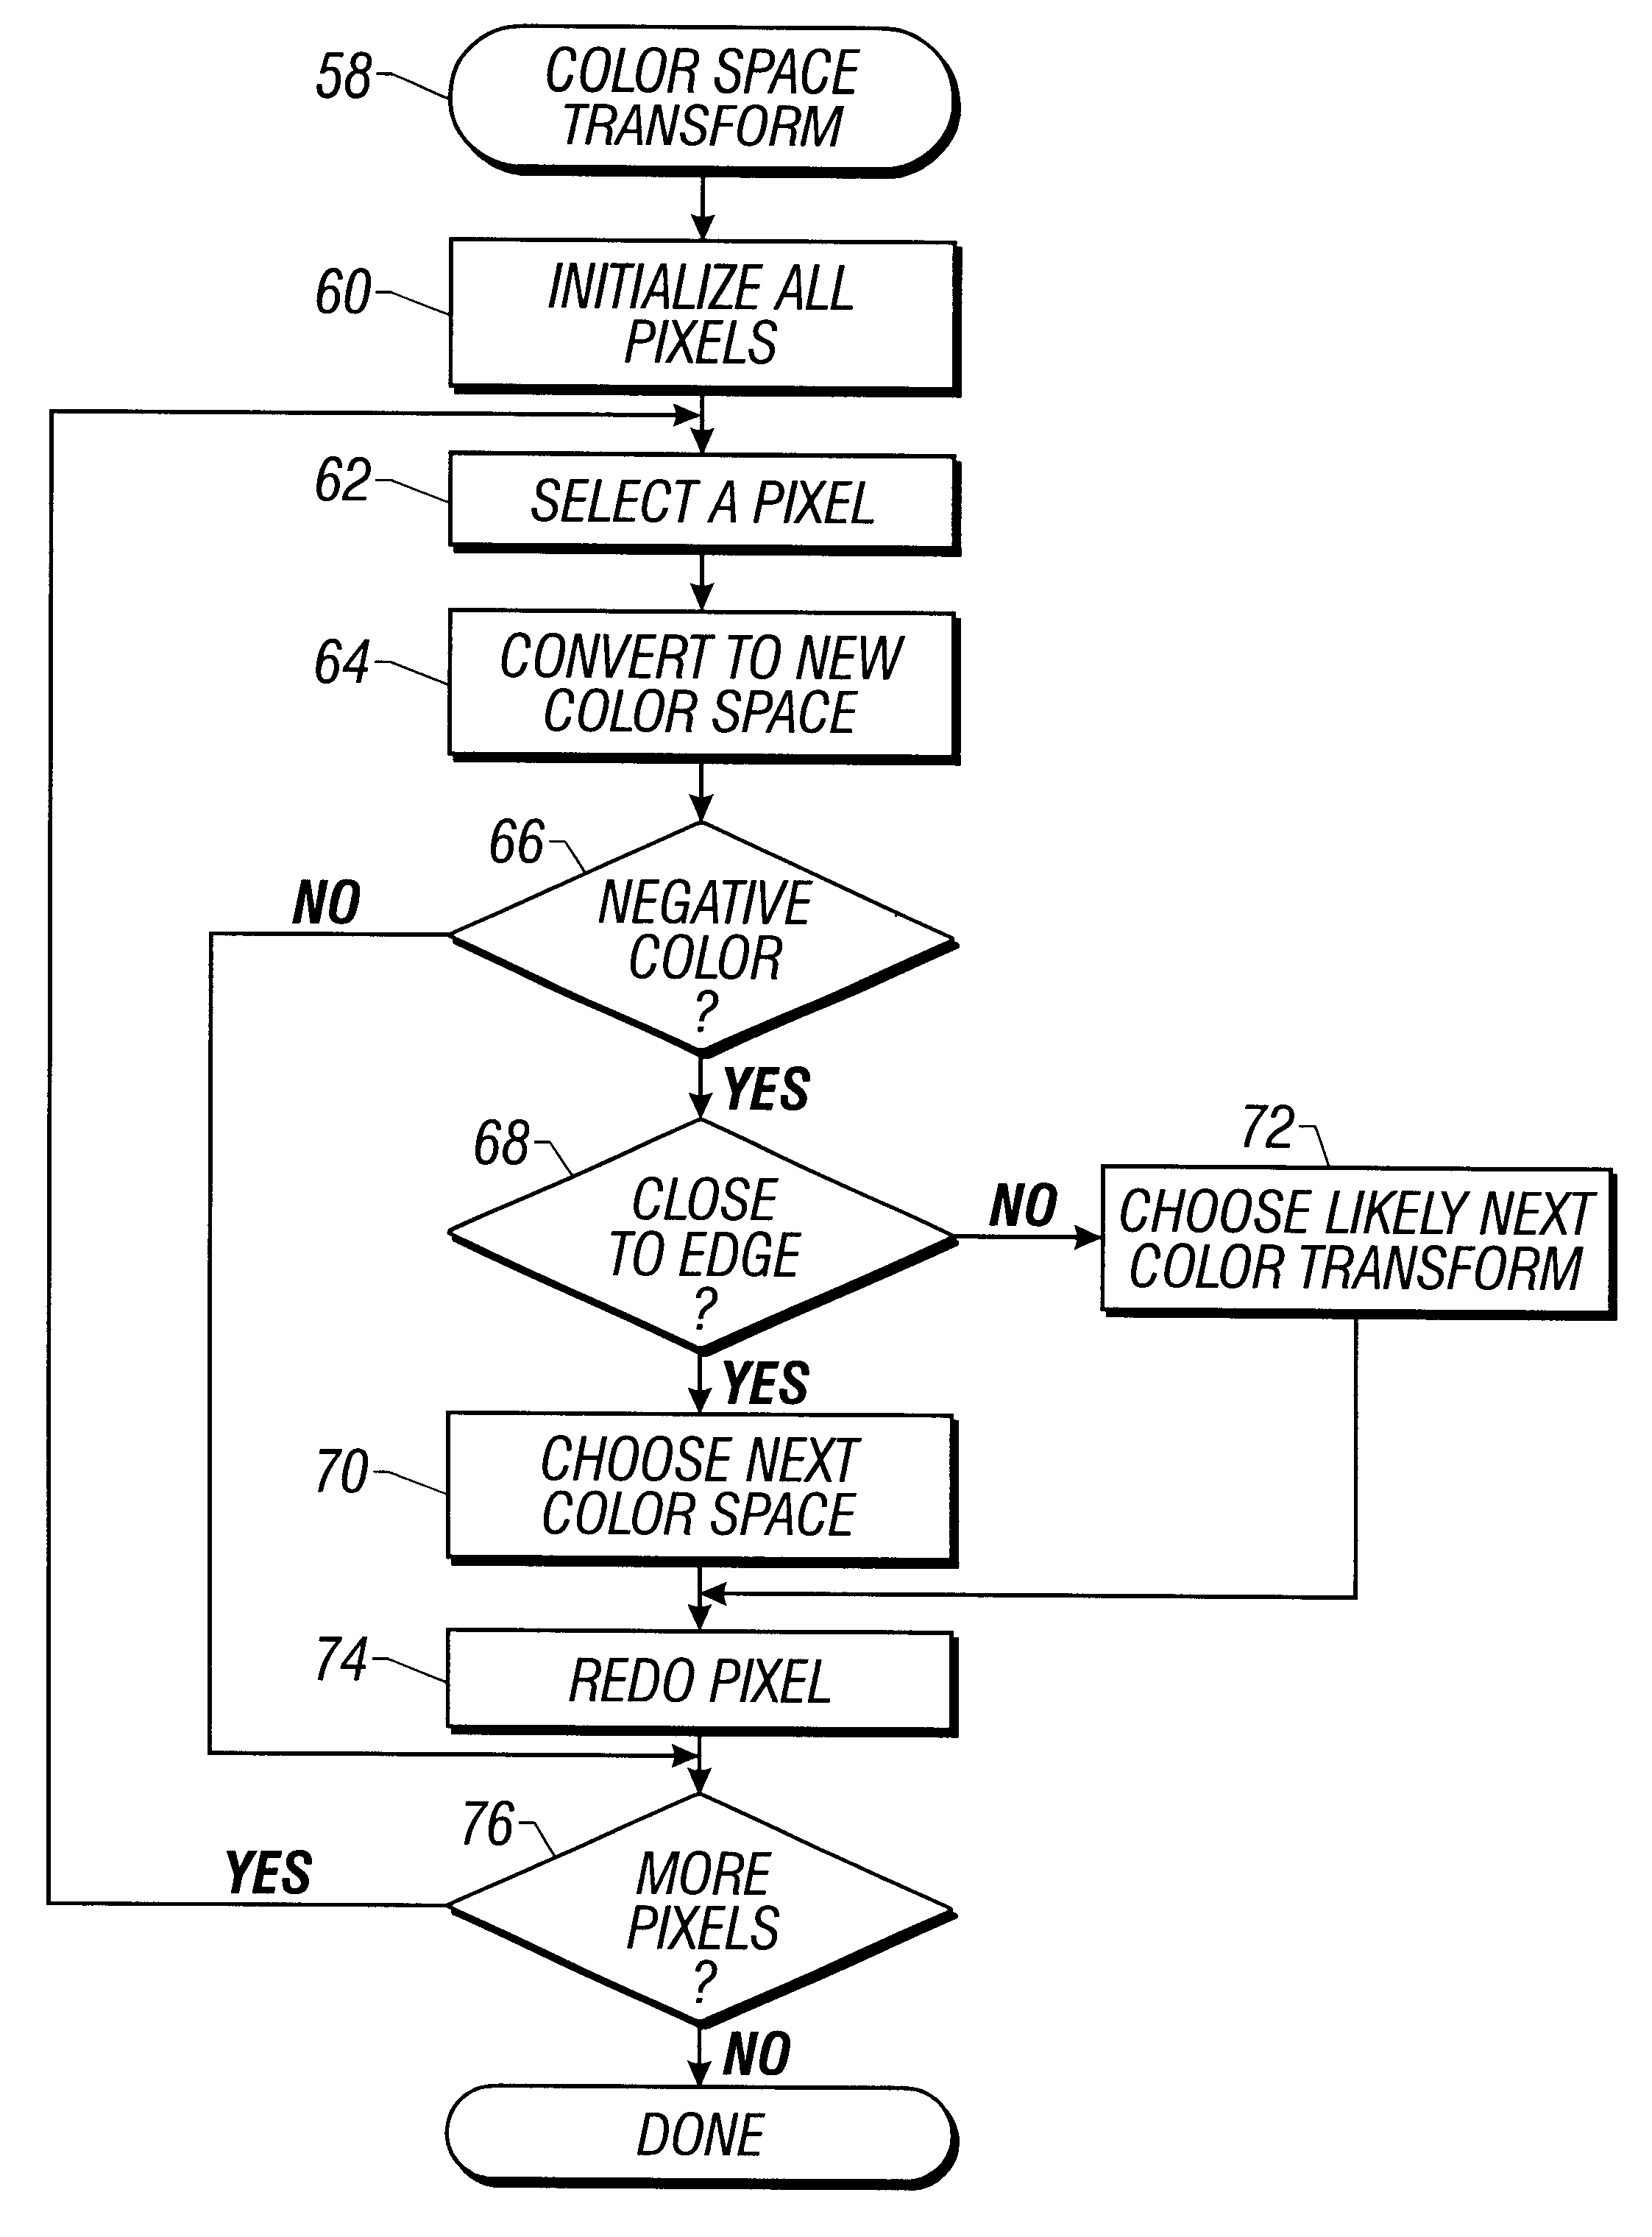 Performing color conversion in extended color polymer displays